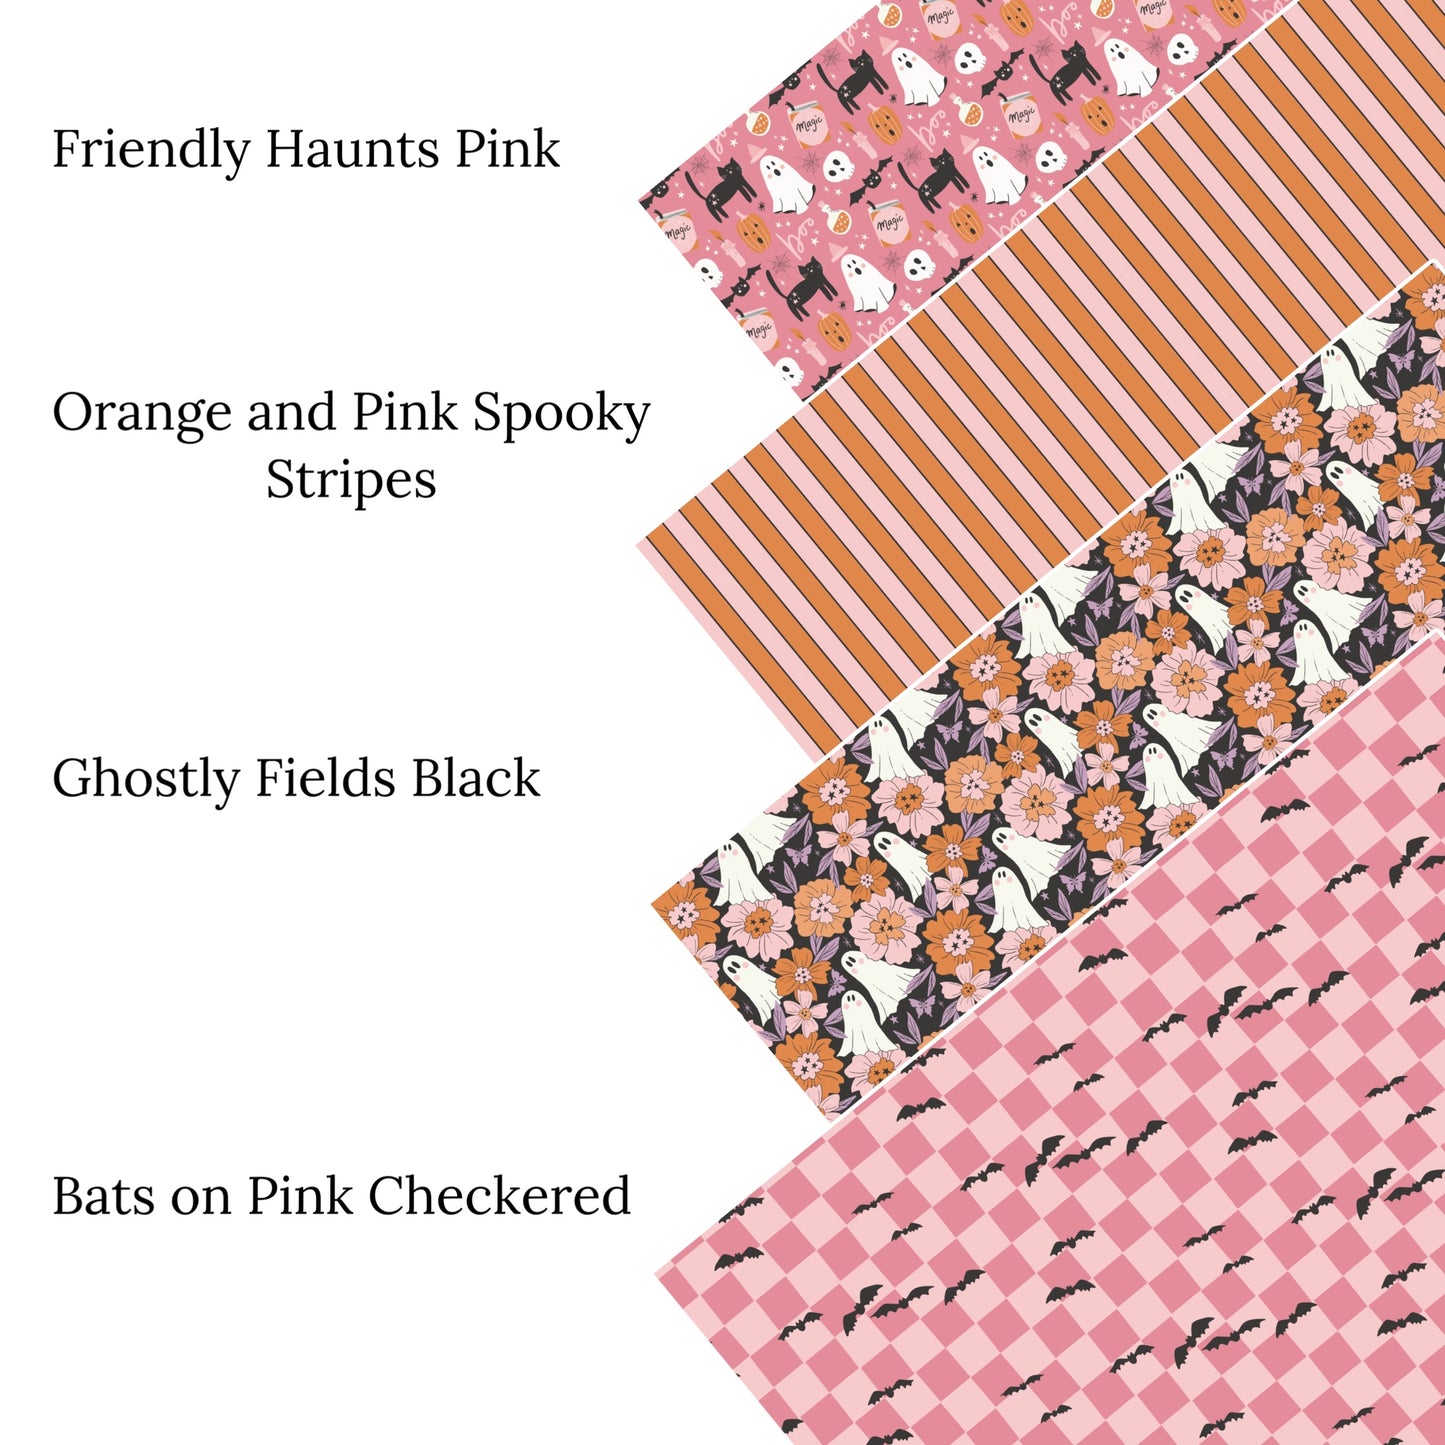 Bats on Pink Checkered Faux Leather Sheets